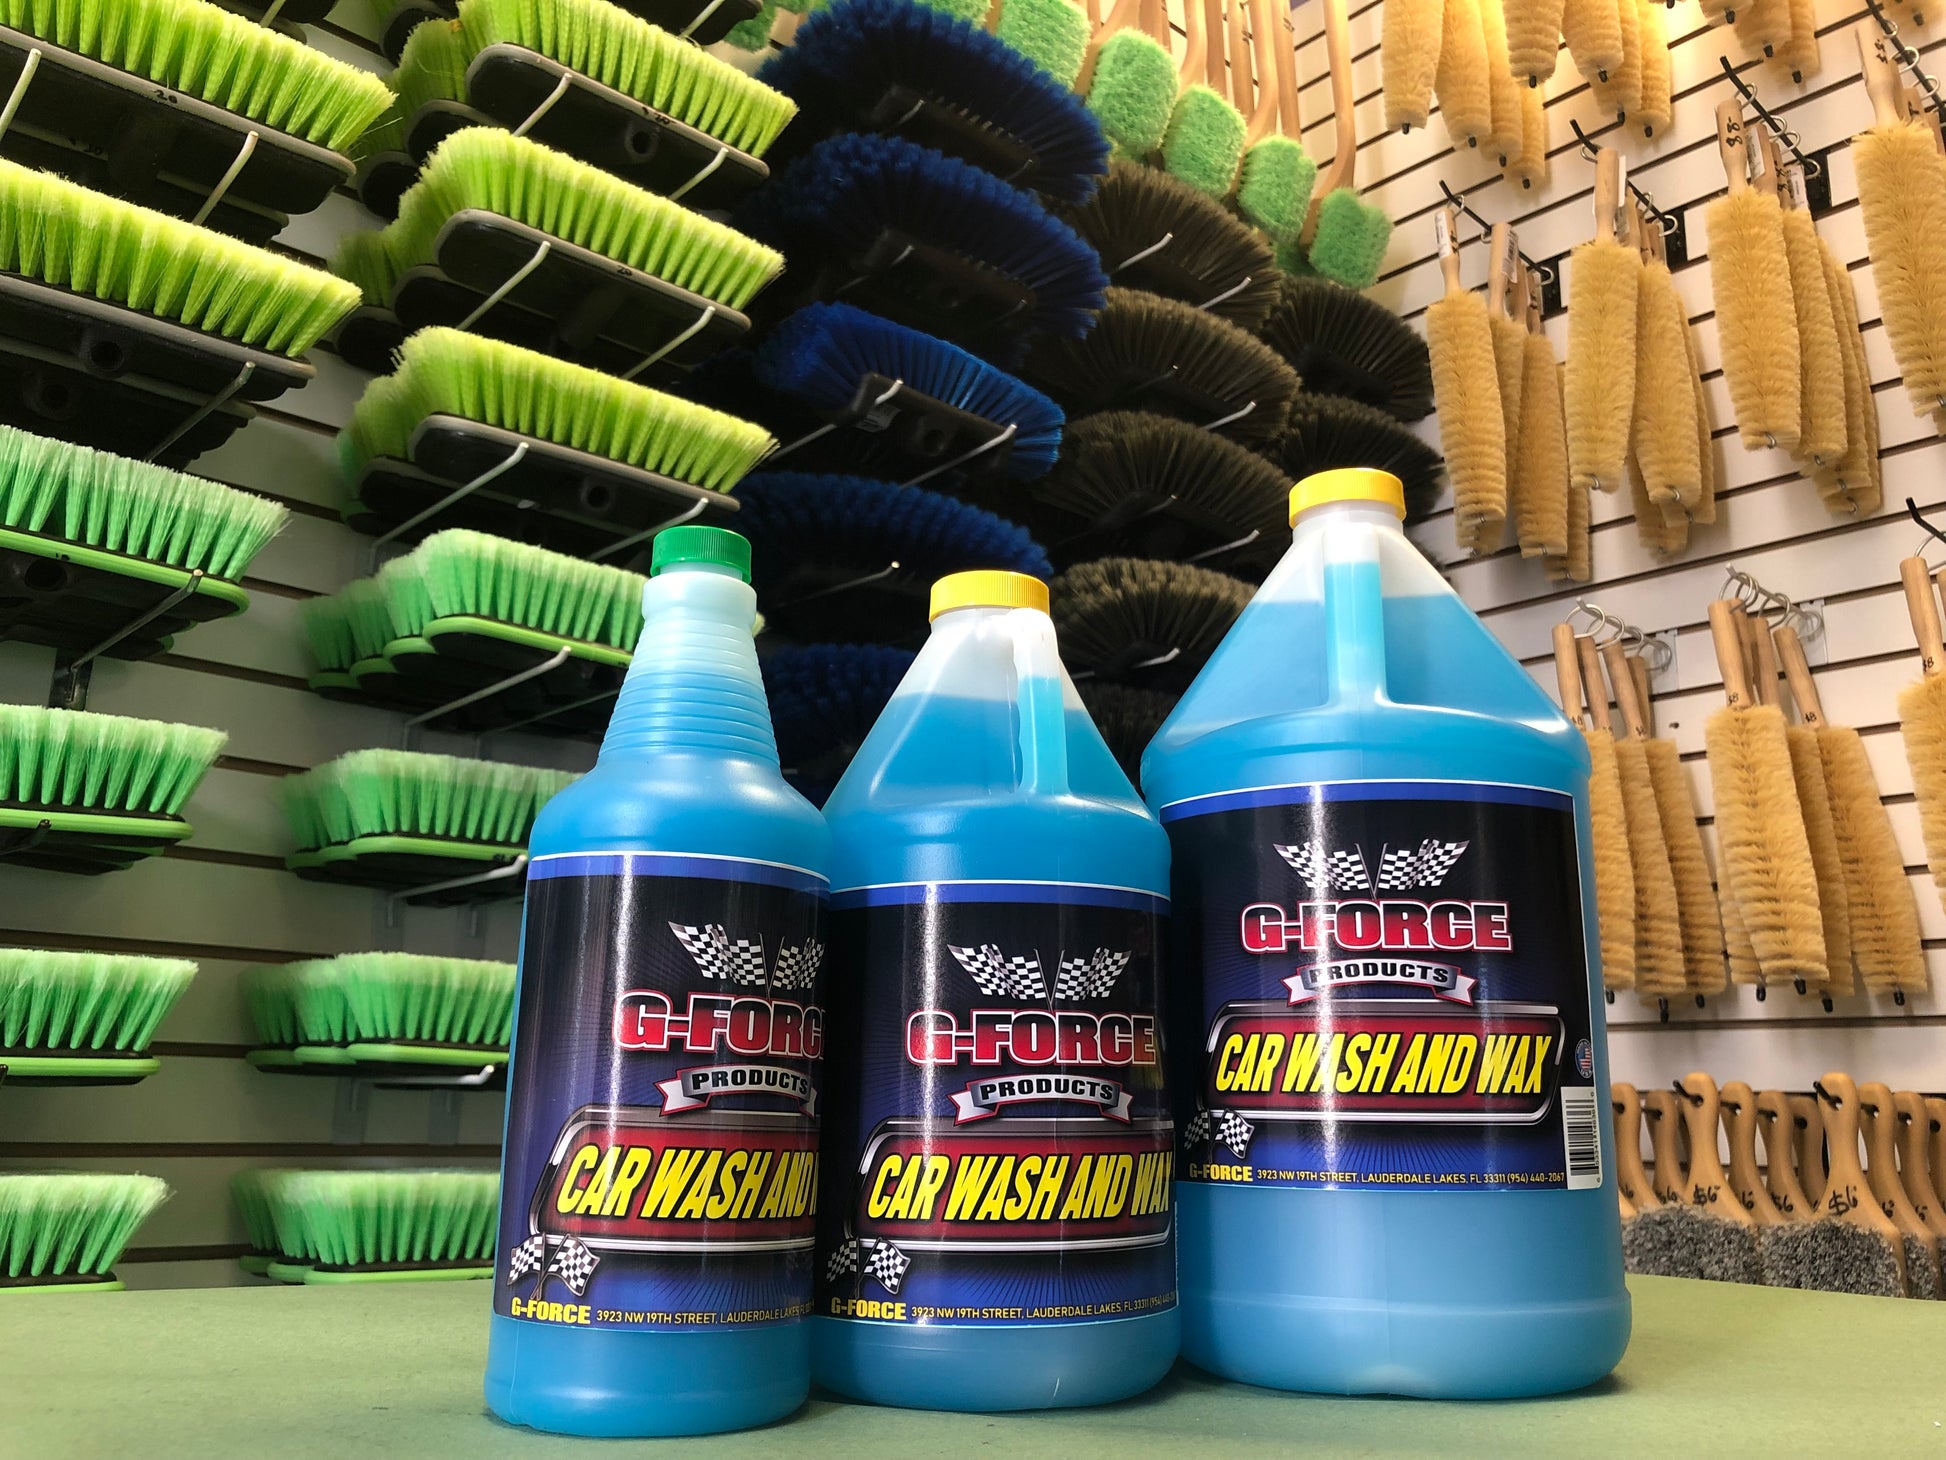 Interior Cleaner – G Force Auto Detailing Products